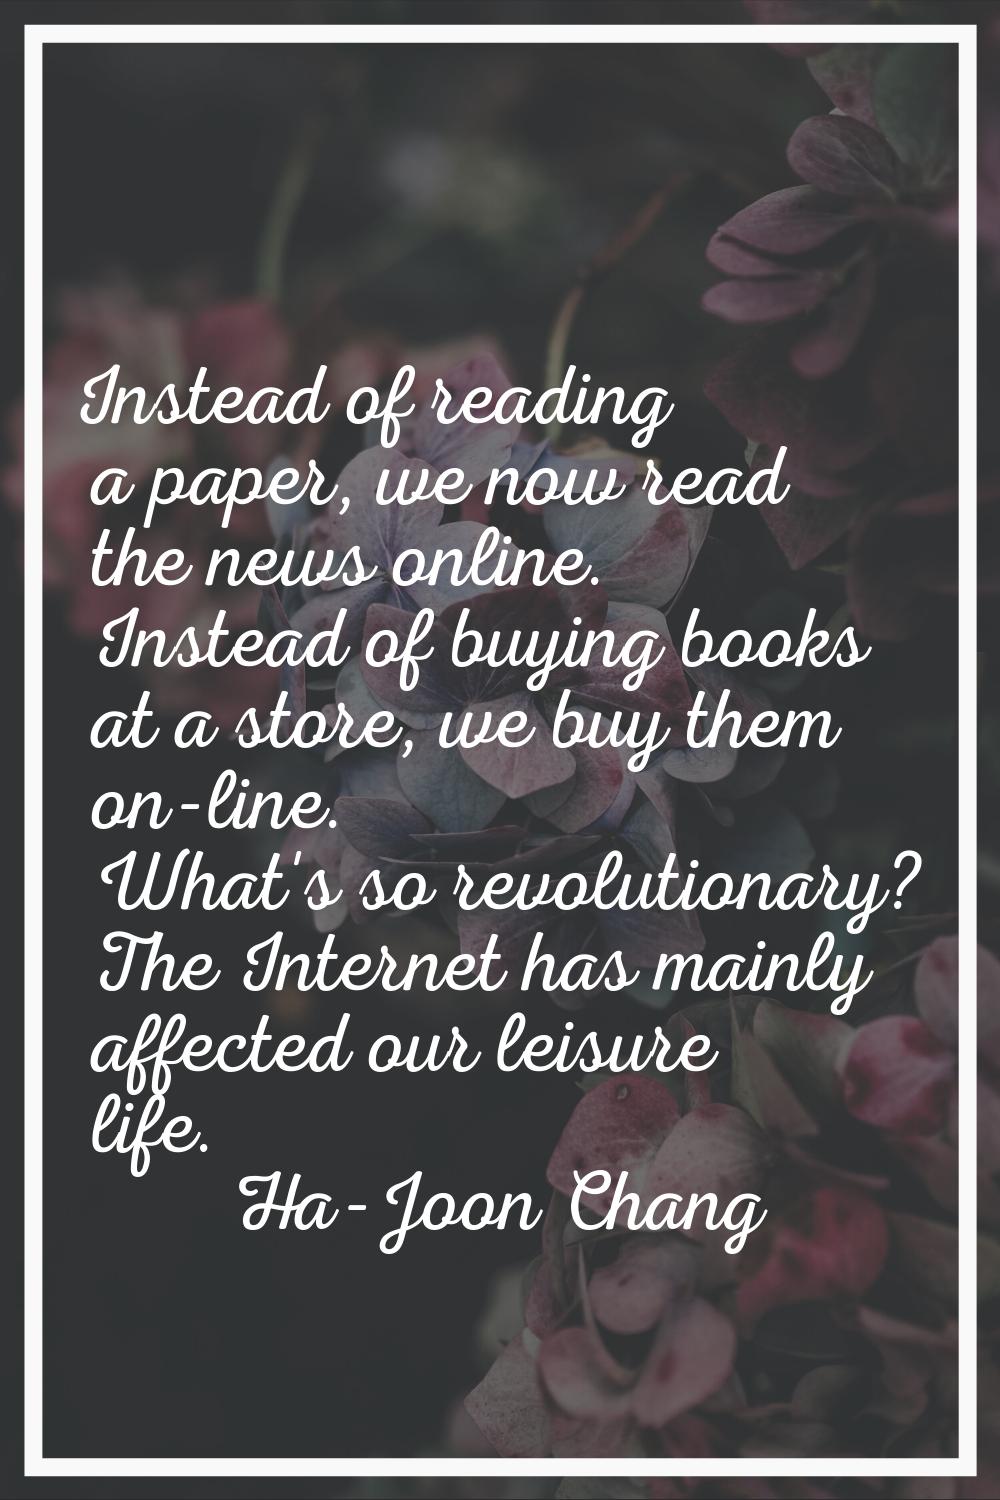 Instead of reading a paper, we now read the news online. Instead of buying books at a store, we buy